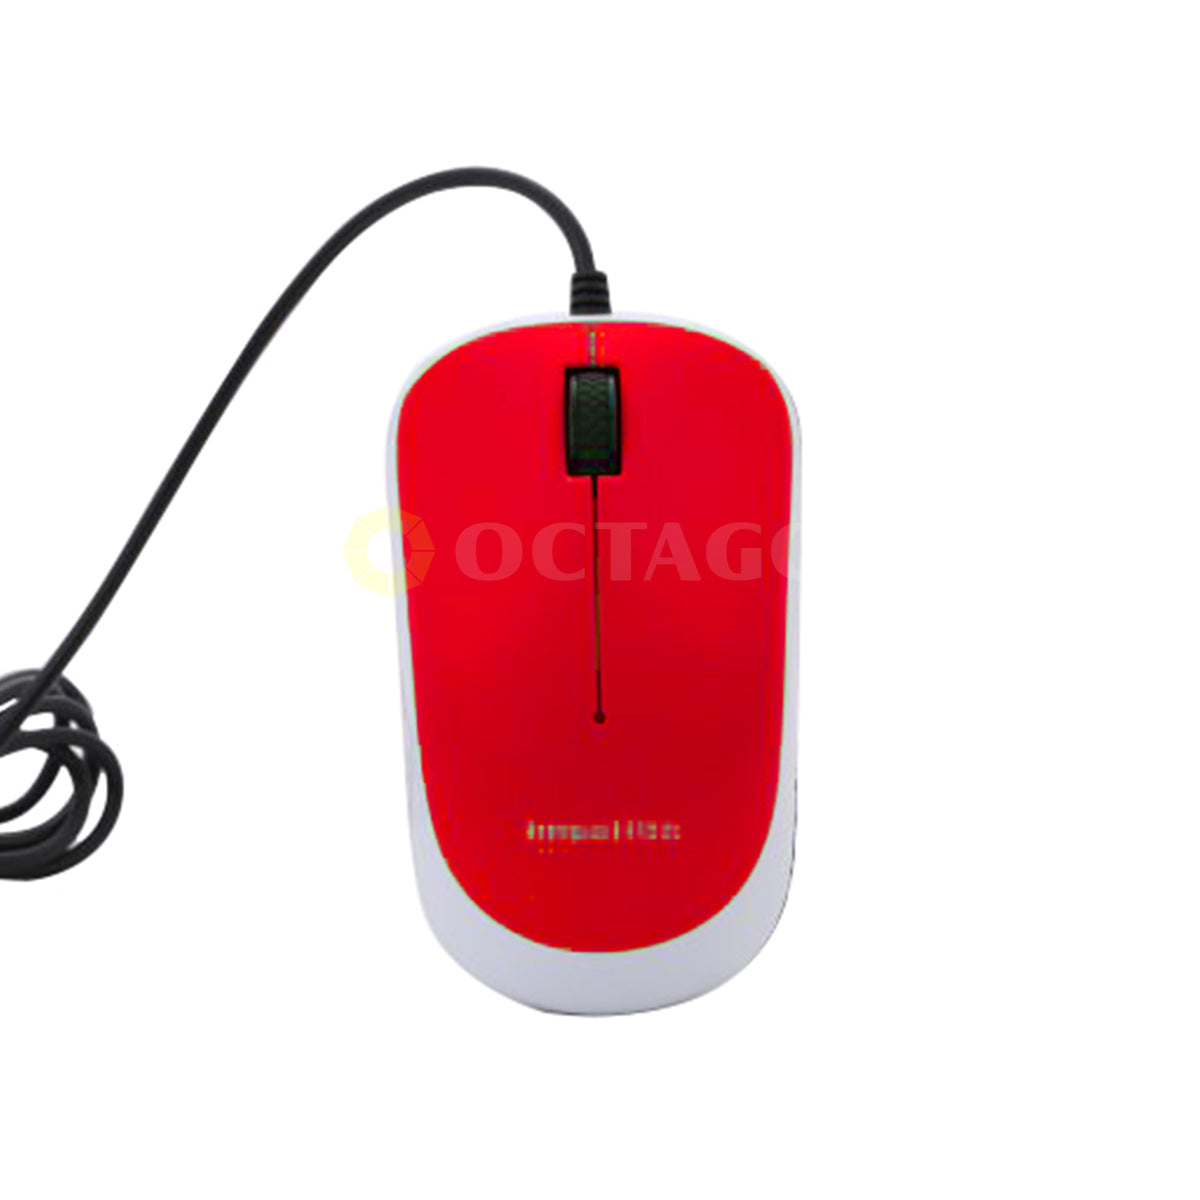 IMPERION MS-110 RED OFFICE WIRED MOUSE